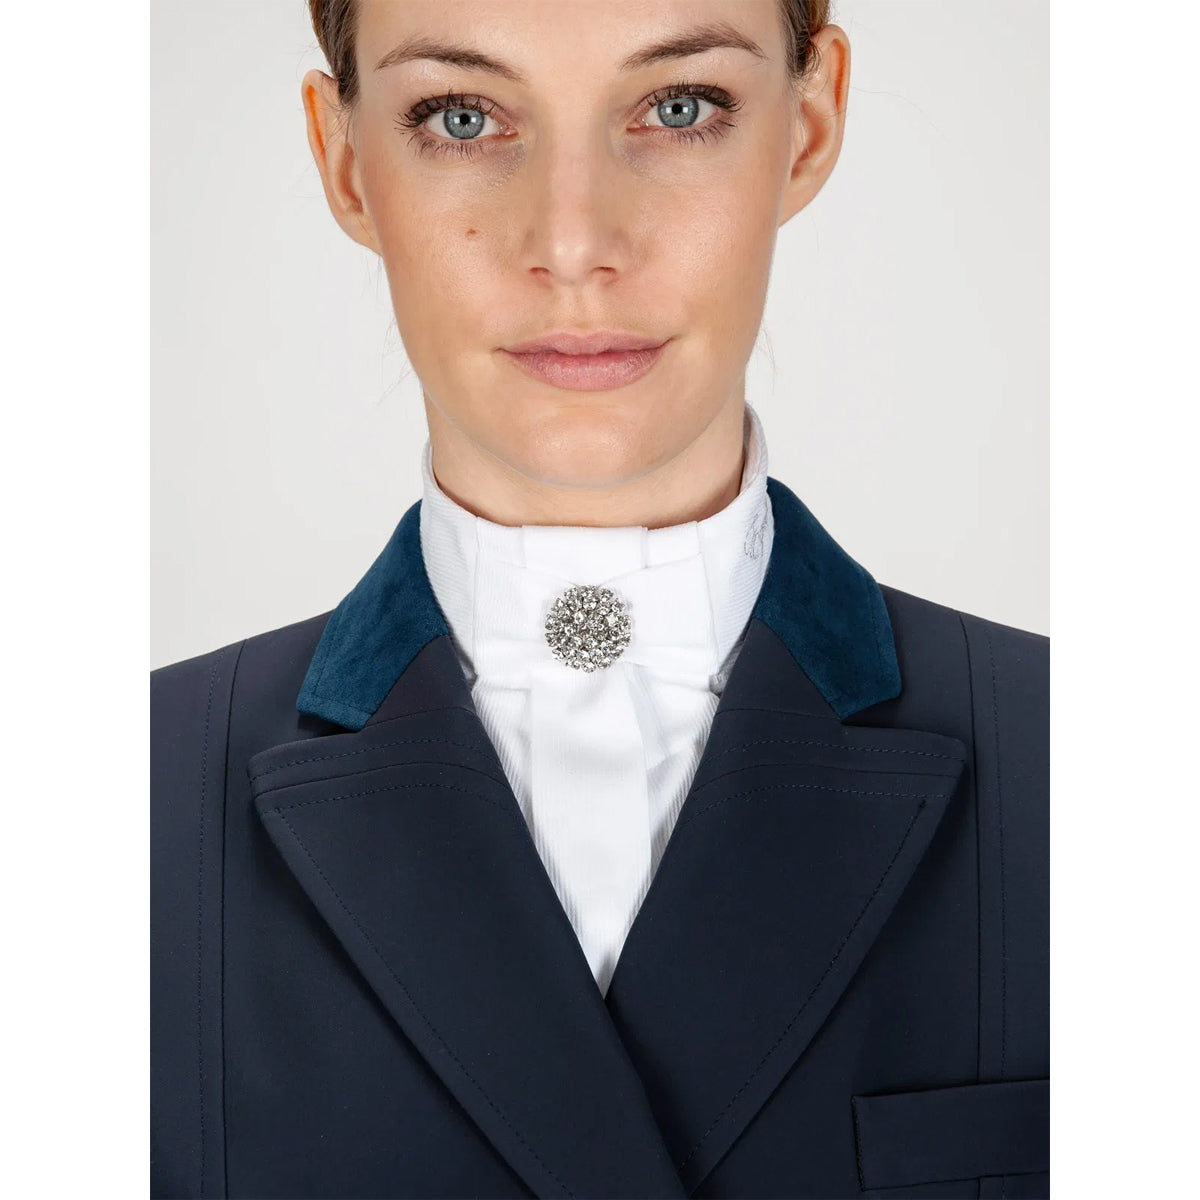 Equiline Frida Stock Tie with Crystal Embellishment